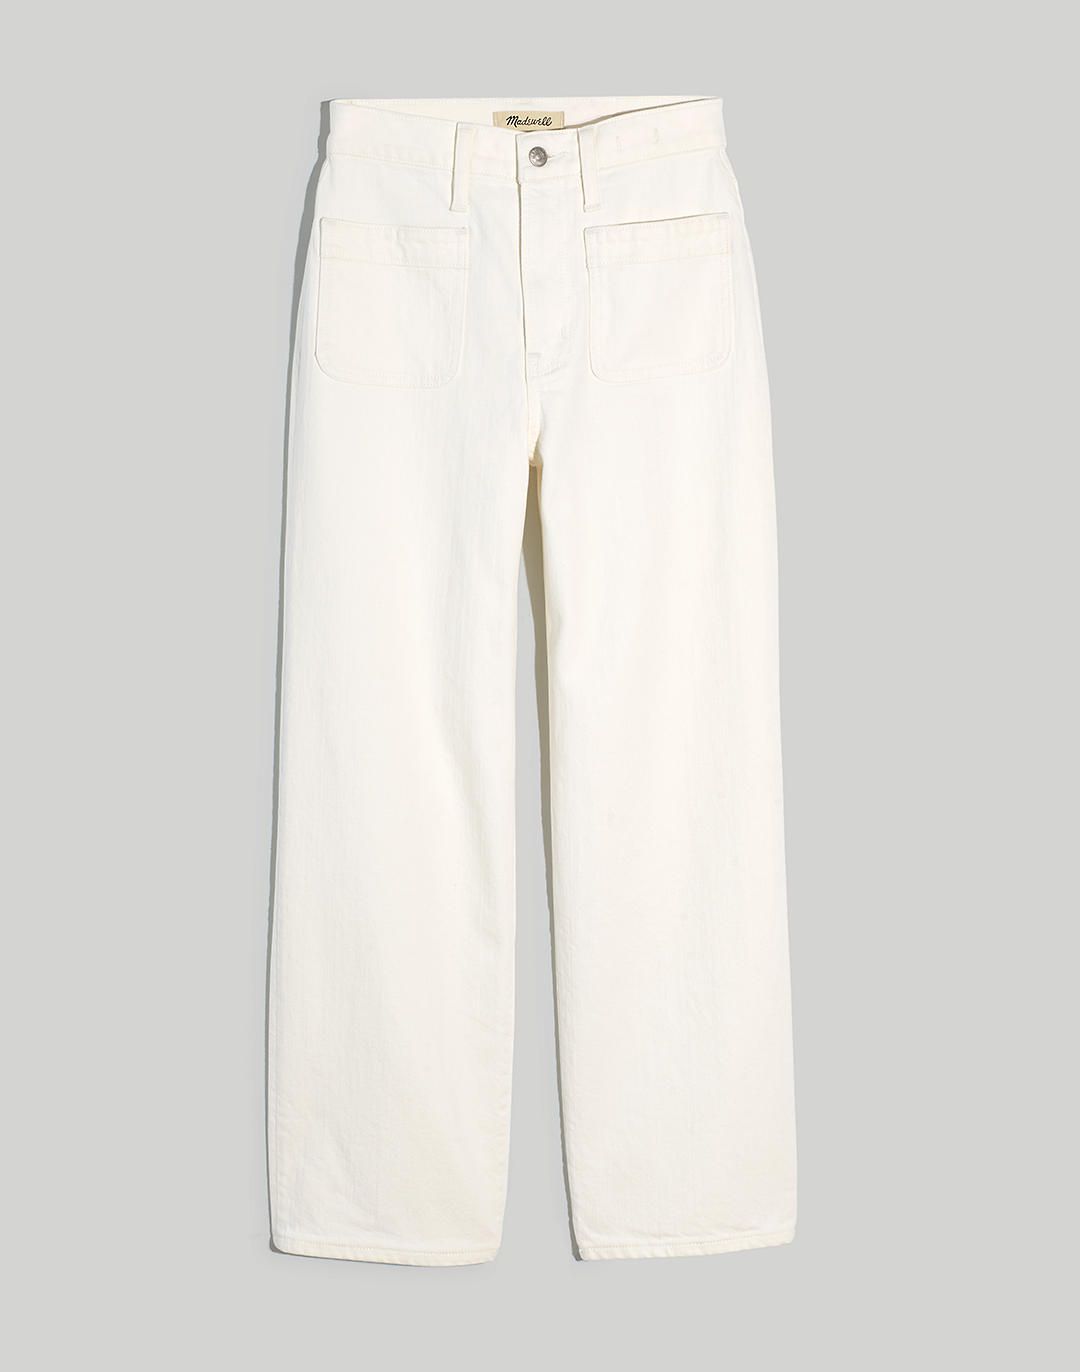 The Petite Perfect Vintage Wide-Leg Crop Jean in Tile White | Madewell